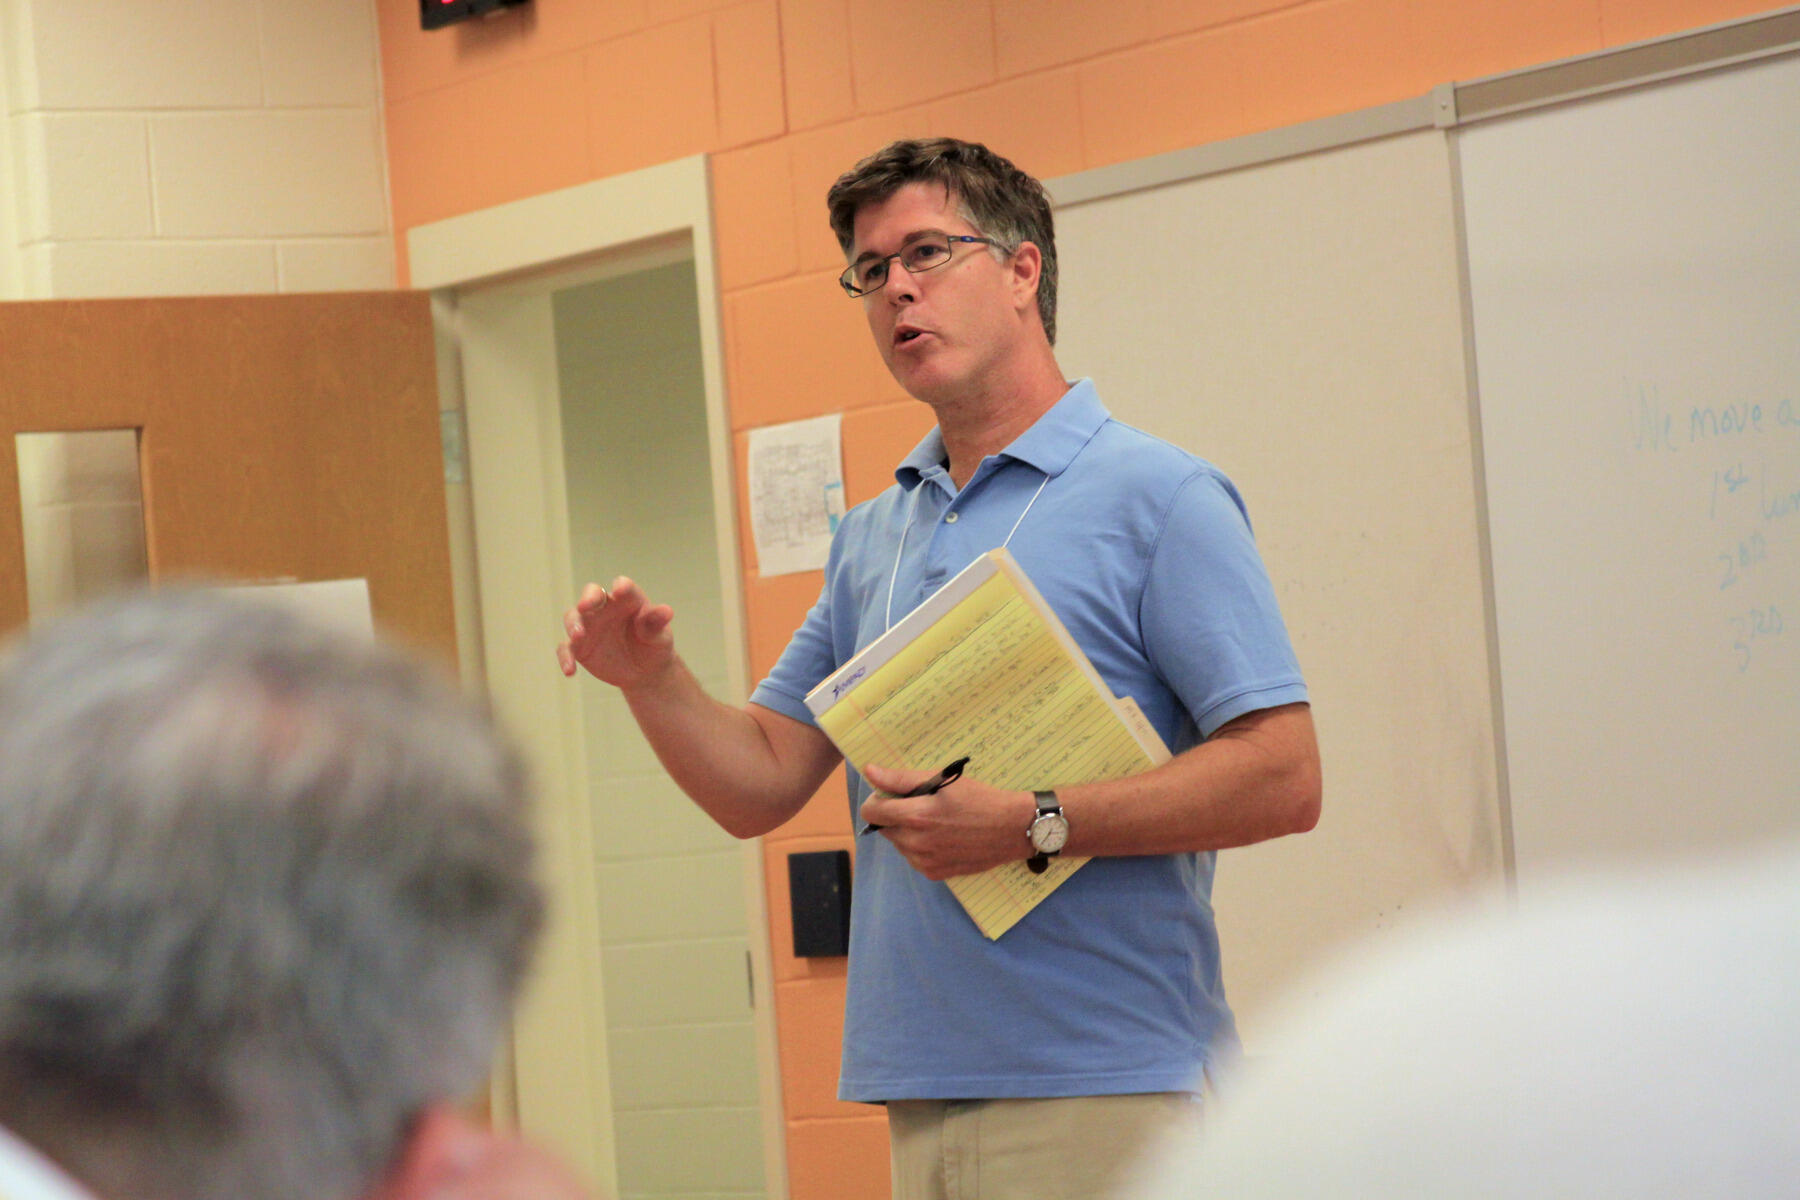 Brian Daugherity, Ph.D., assistant professor of history at VCU, speaks to schoolteachers in 2015 as part of “The Long Road from Brown: School Desegregation in Virginia” workshops.